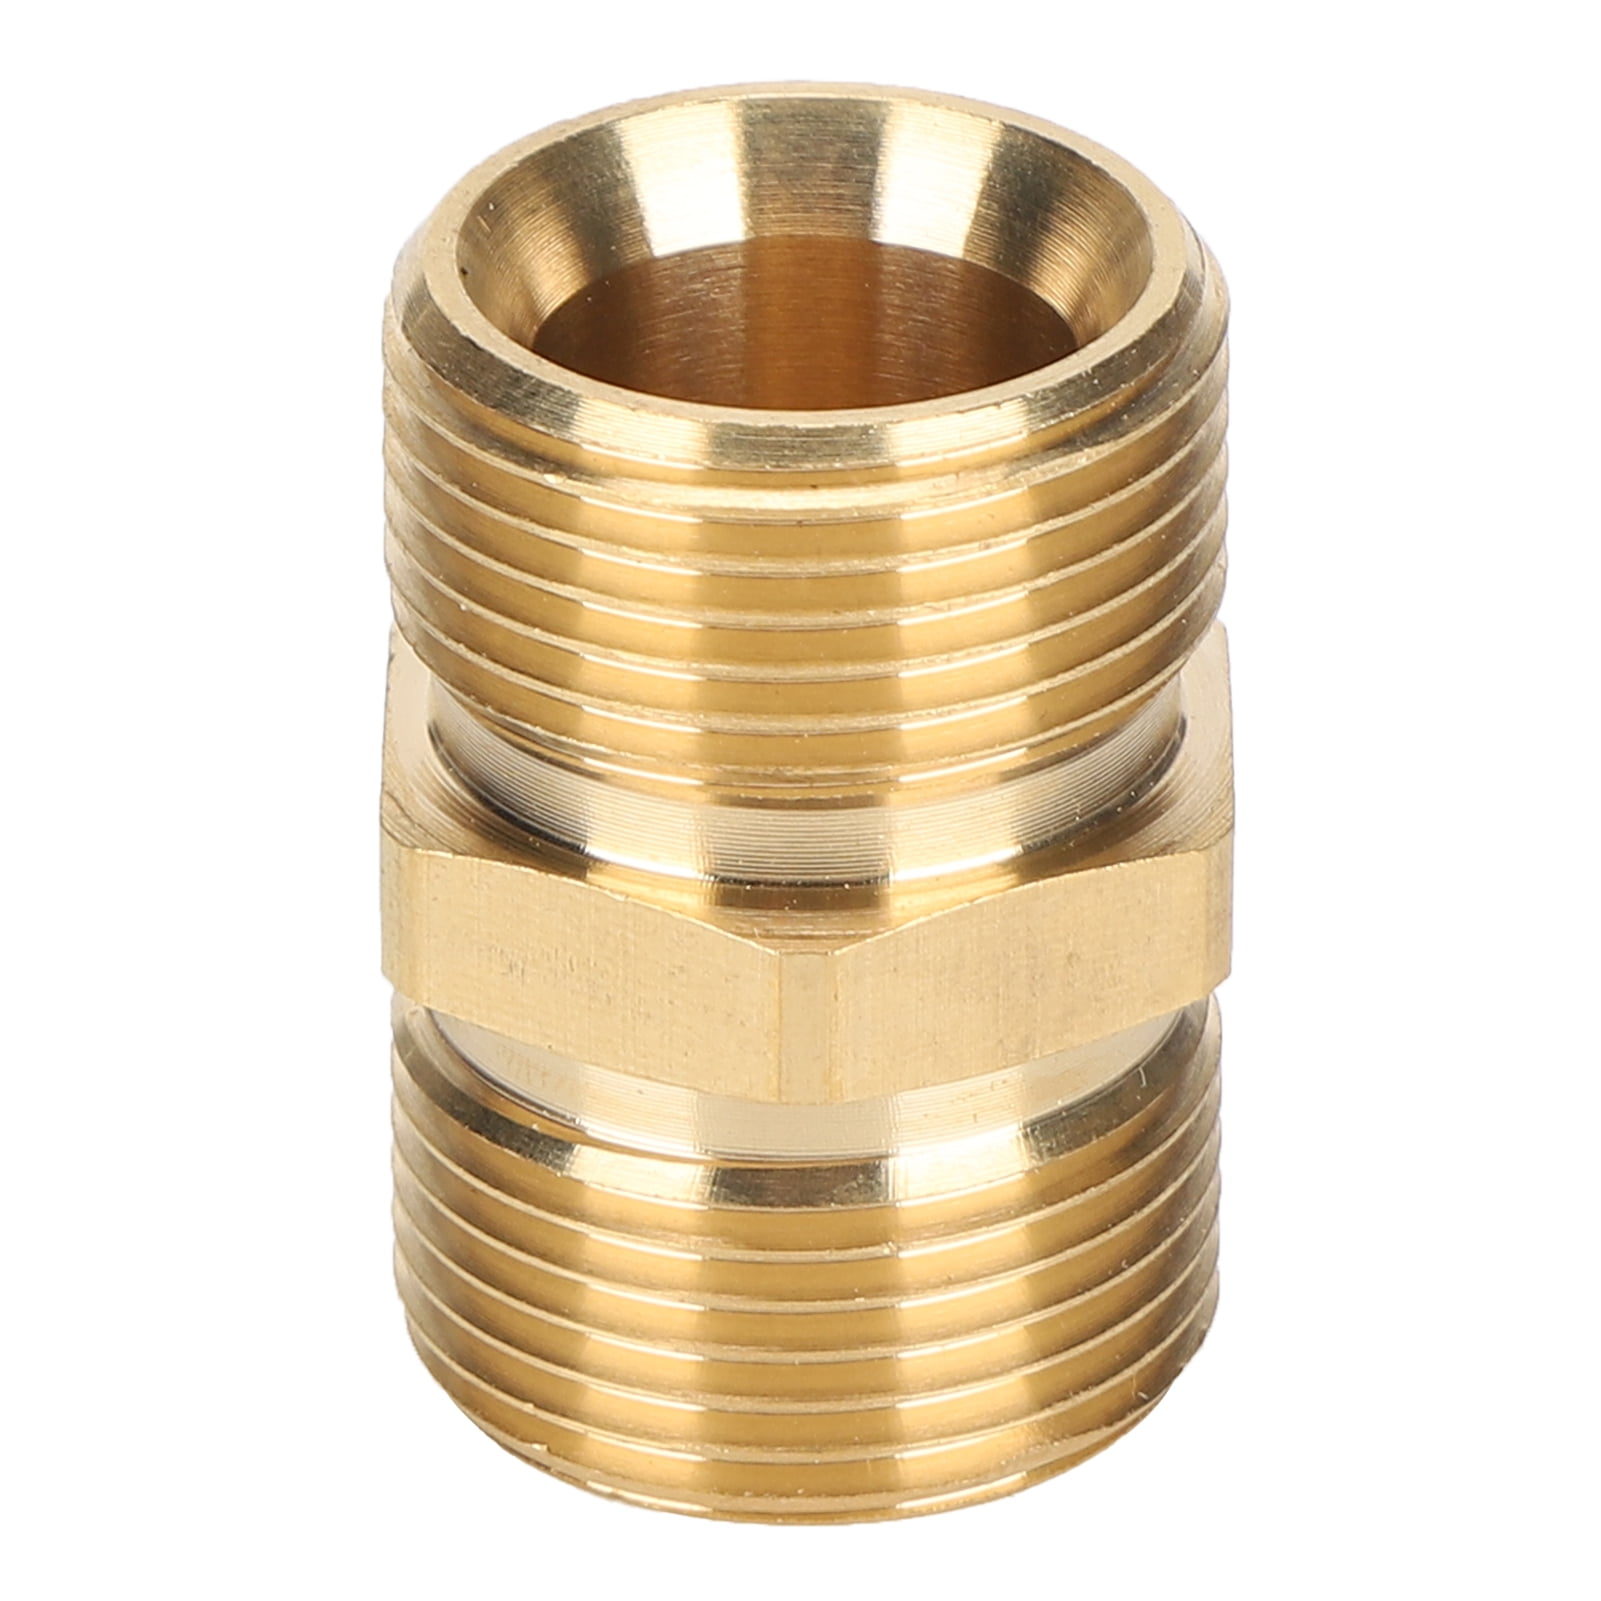 Pressure Washer Couplor Quick Connector Water Hose Fitting M22 Male 